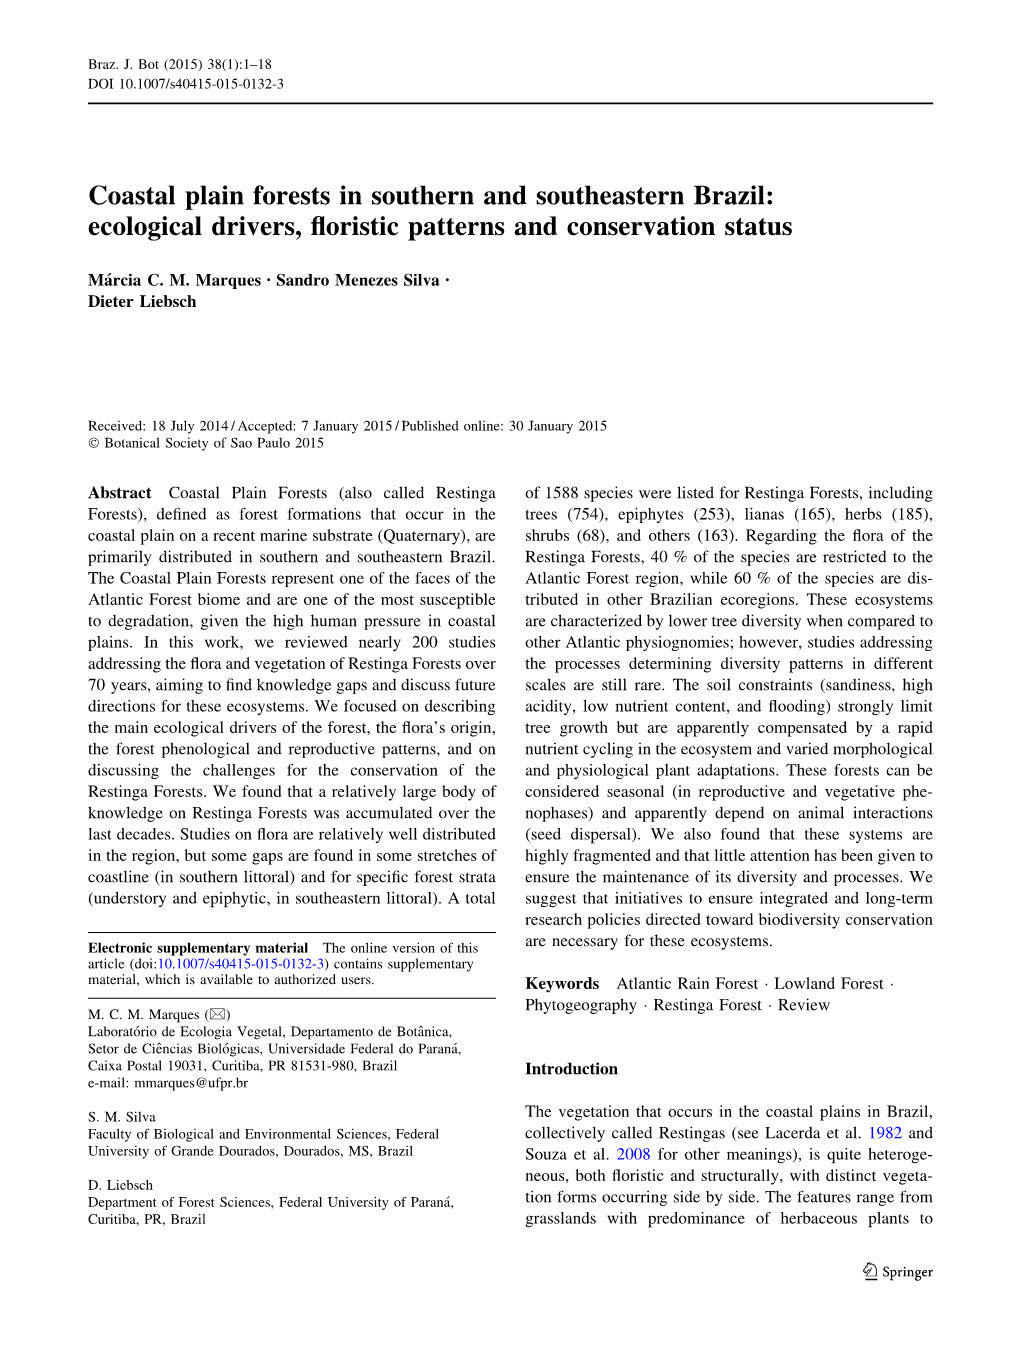 Coastal Plain Forests in Southern and Southeastern Brazil: Ecological Drivers, ﬂoristic Patterns and Conservation Status